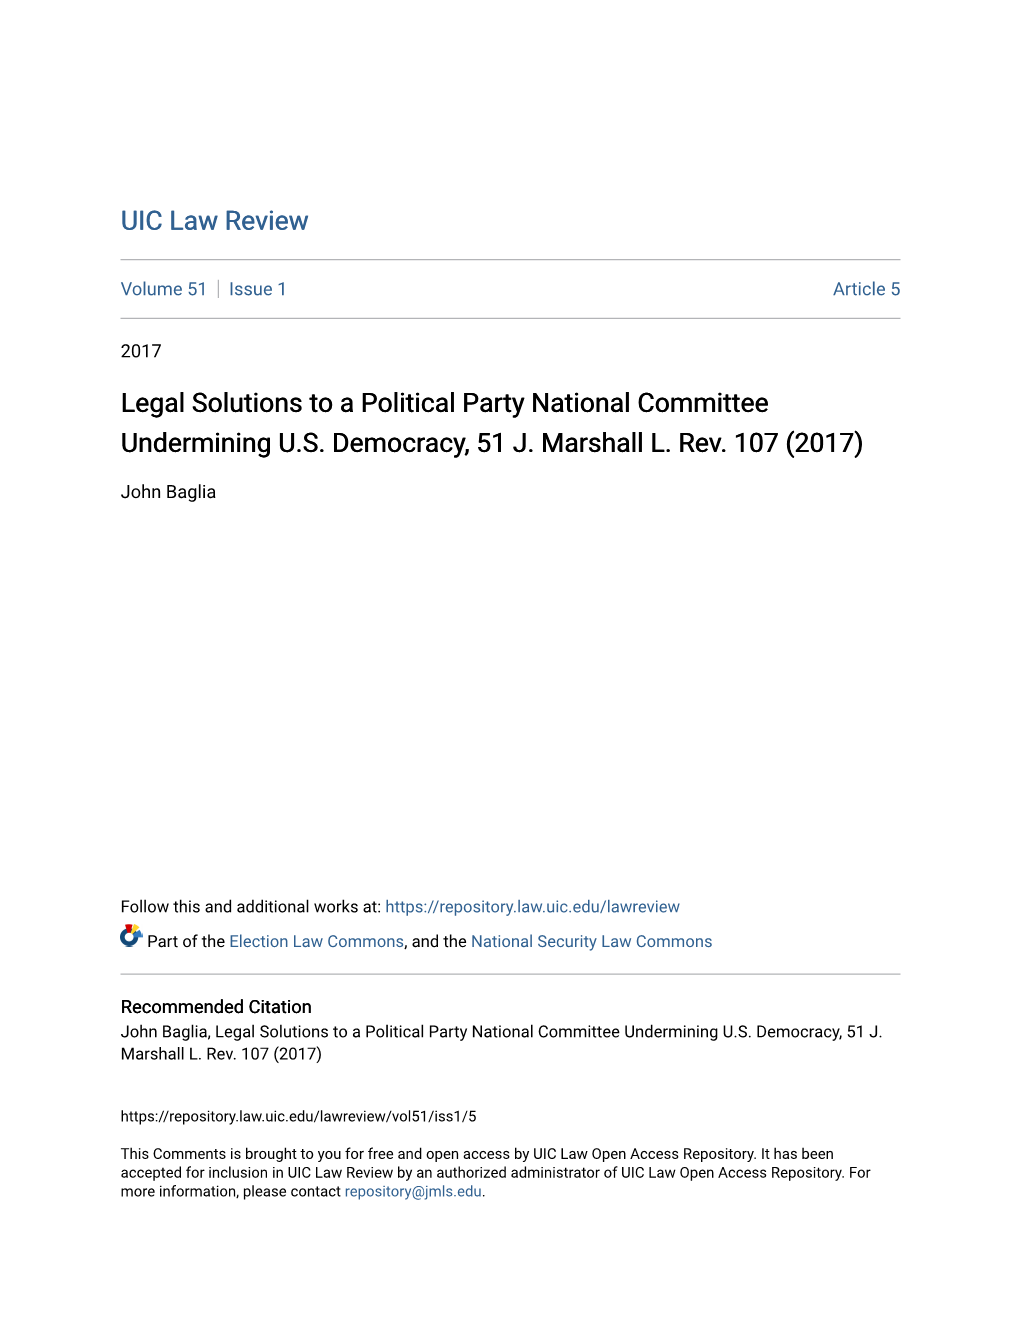 Legal Solutions to a Political Party National Committee Undermining U.S